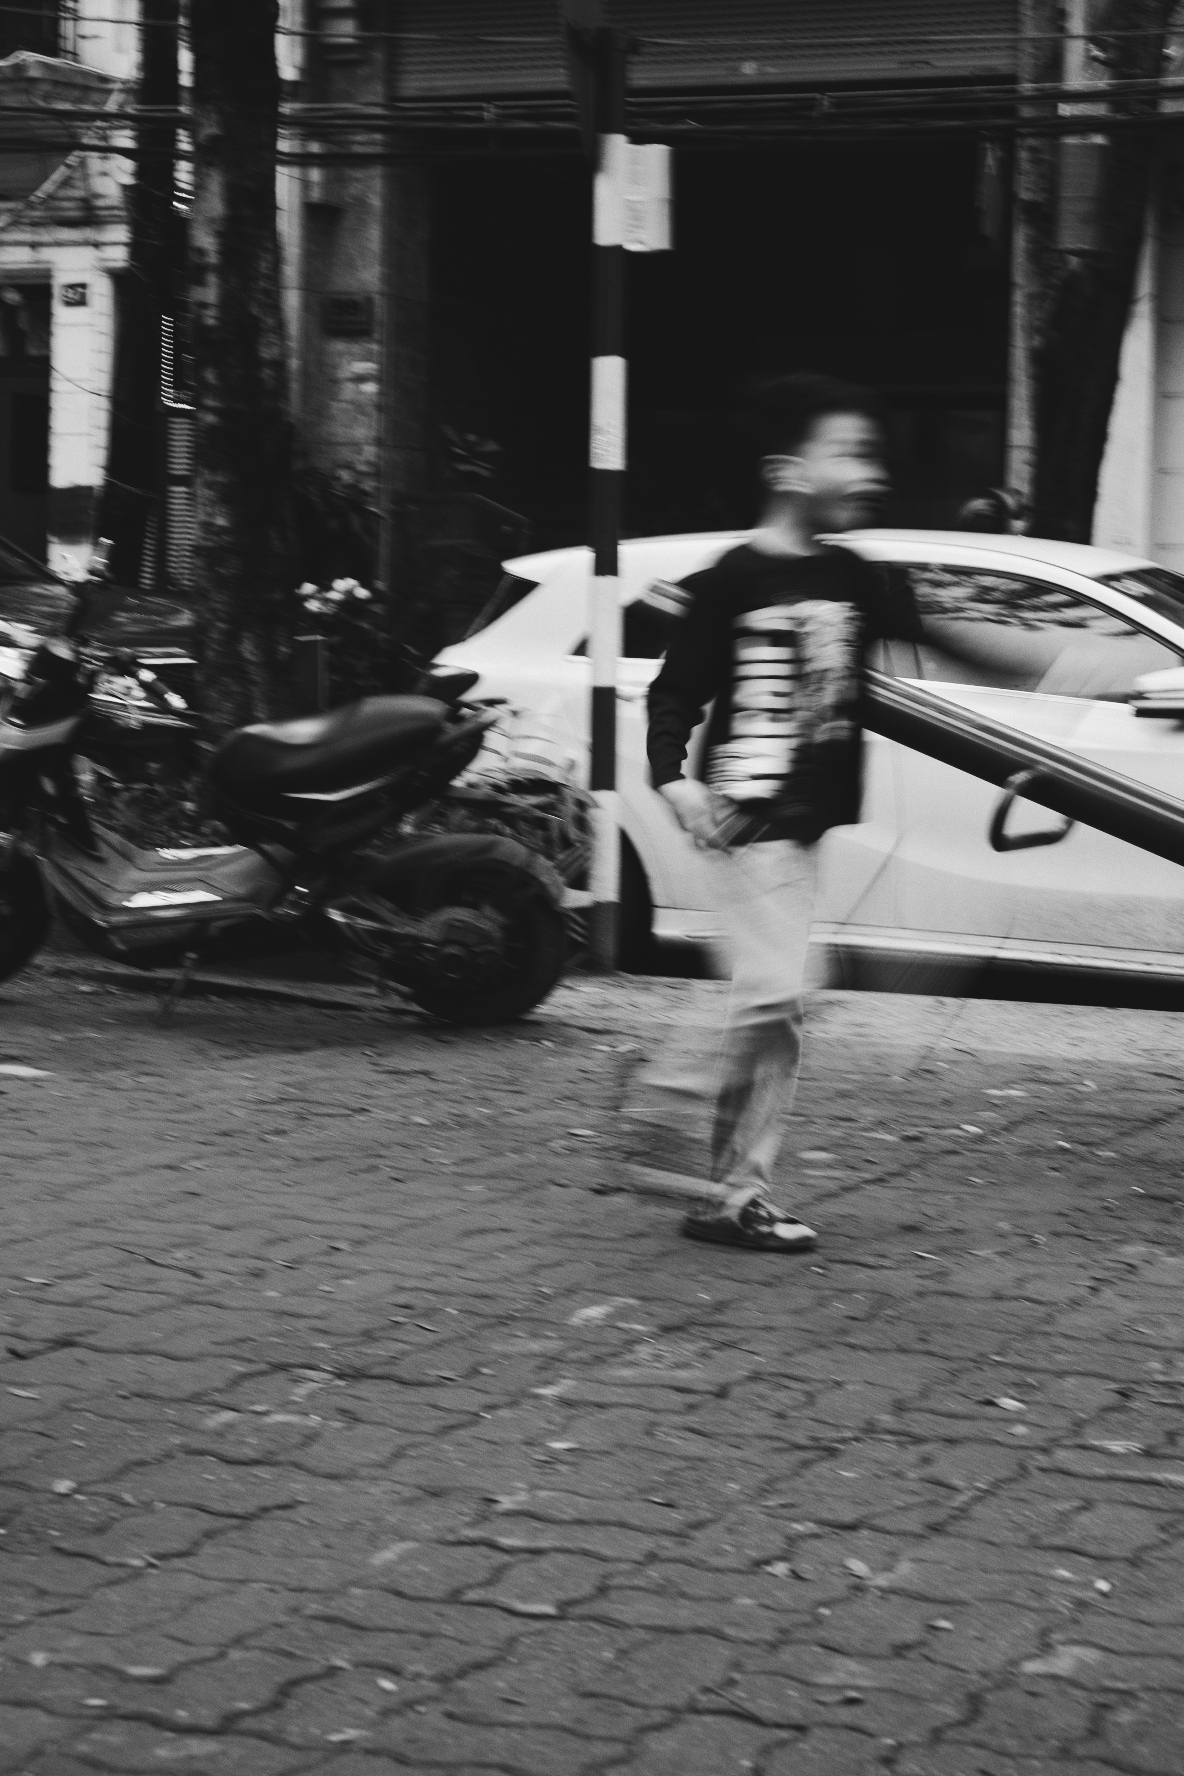 Black and white photograph of a boy playing badminton, just after hitting the ball. Blurredm He's in the middle  of a paved playground, with parking cars and motorbikes just behind.